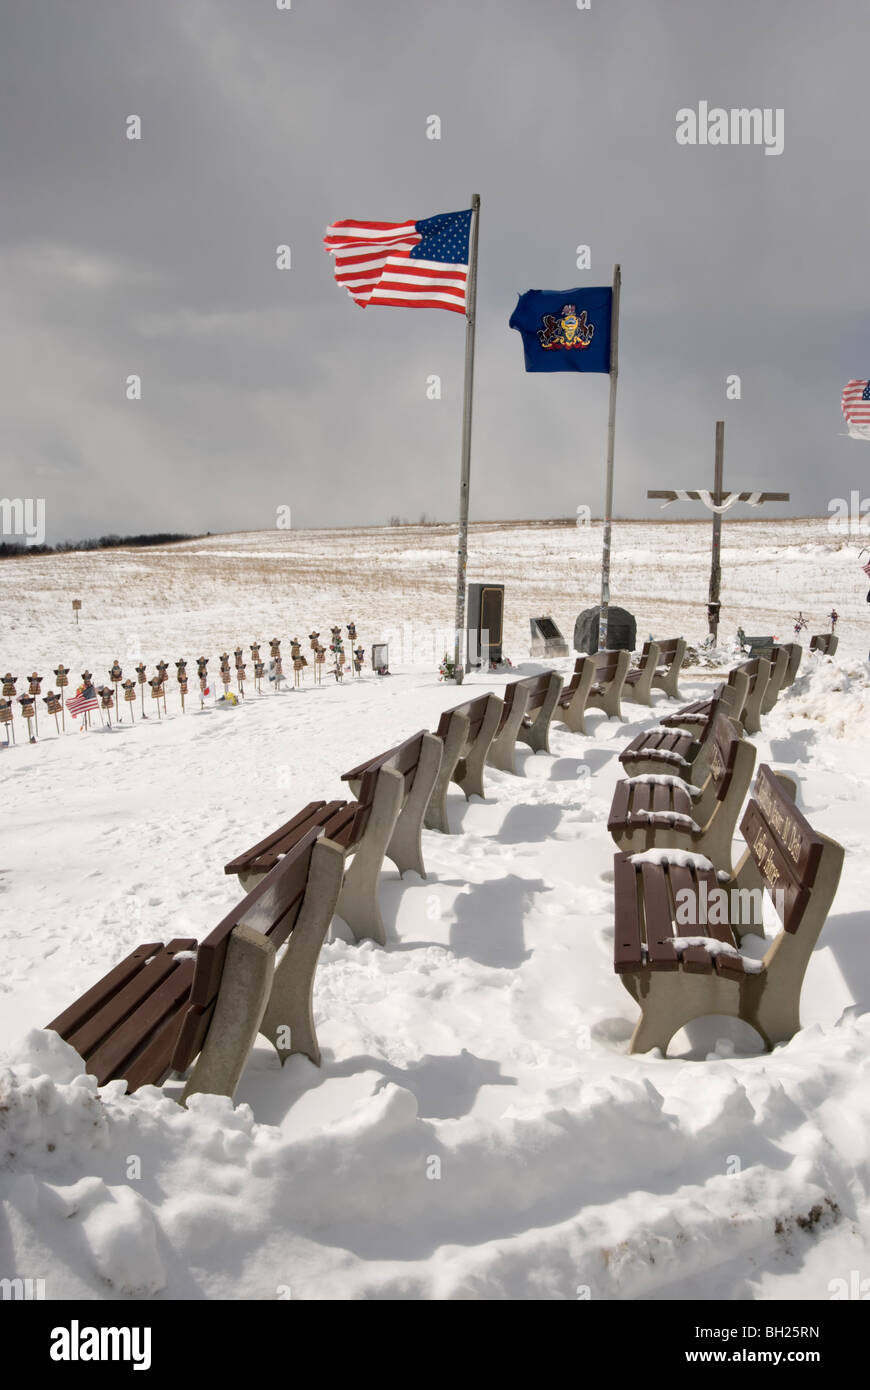 Stock photo of flags flying in the bitter cold winter wind Flight 93 Memorial crash site on 911, Shanksville, PA, USA. Stock Photo